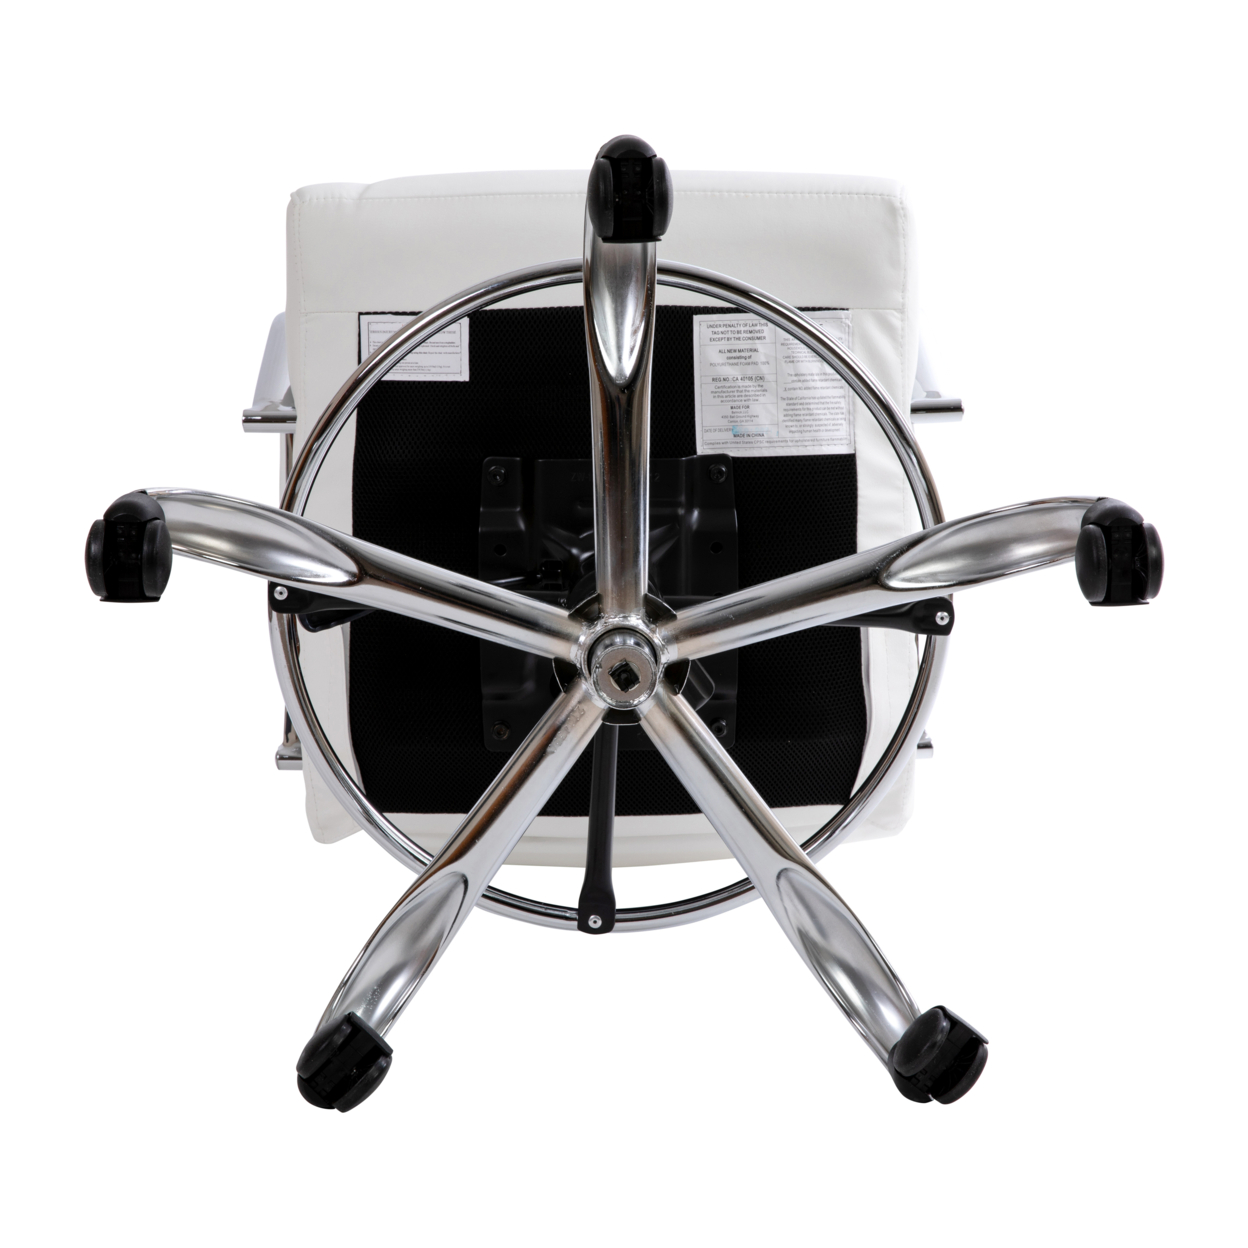 Mid-Back White LeatherSoft Drafting Chair With Adjustable Foot Ring And Chrome Base